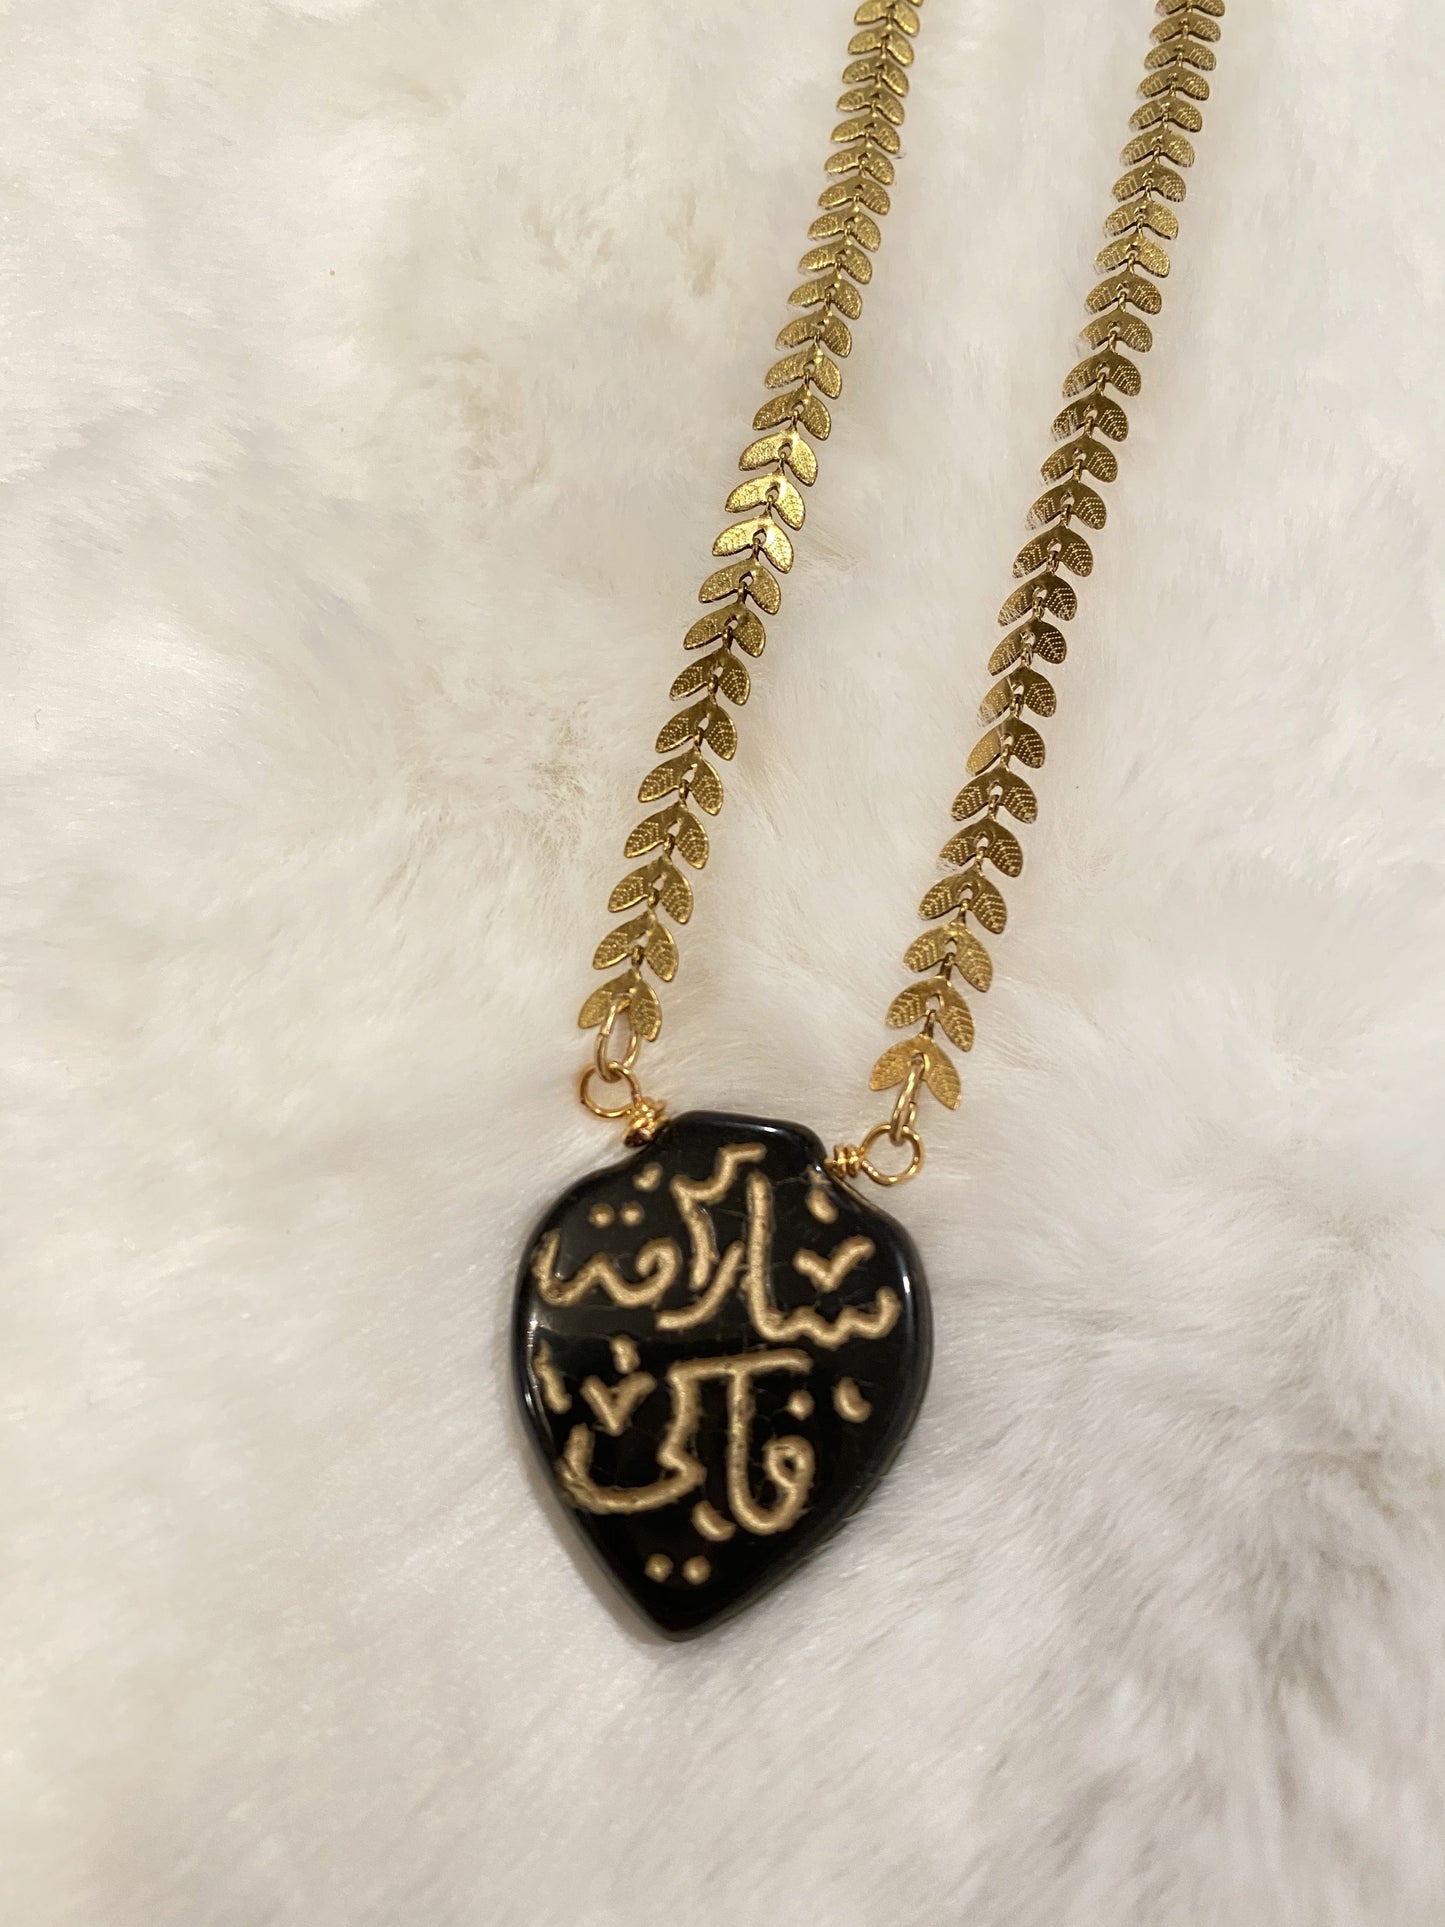 Reversible Czech Glass Necklace - "Allah Suffices Me"